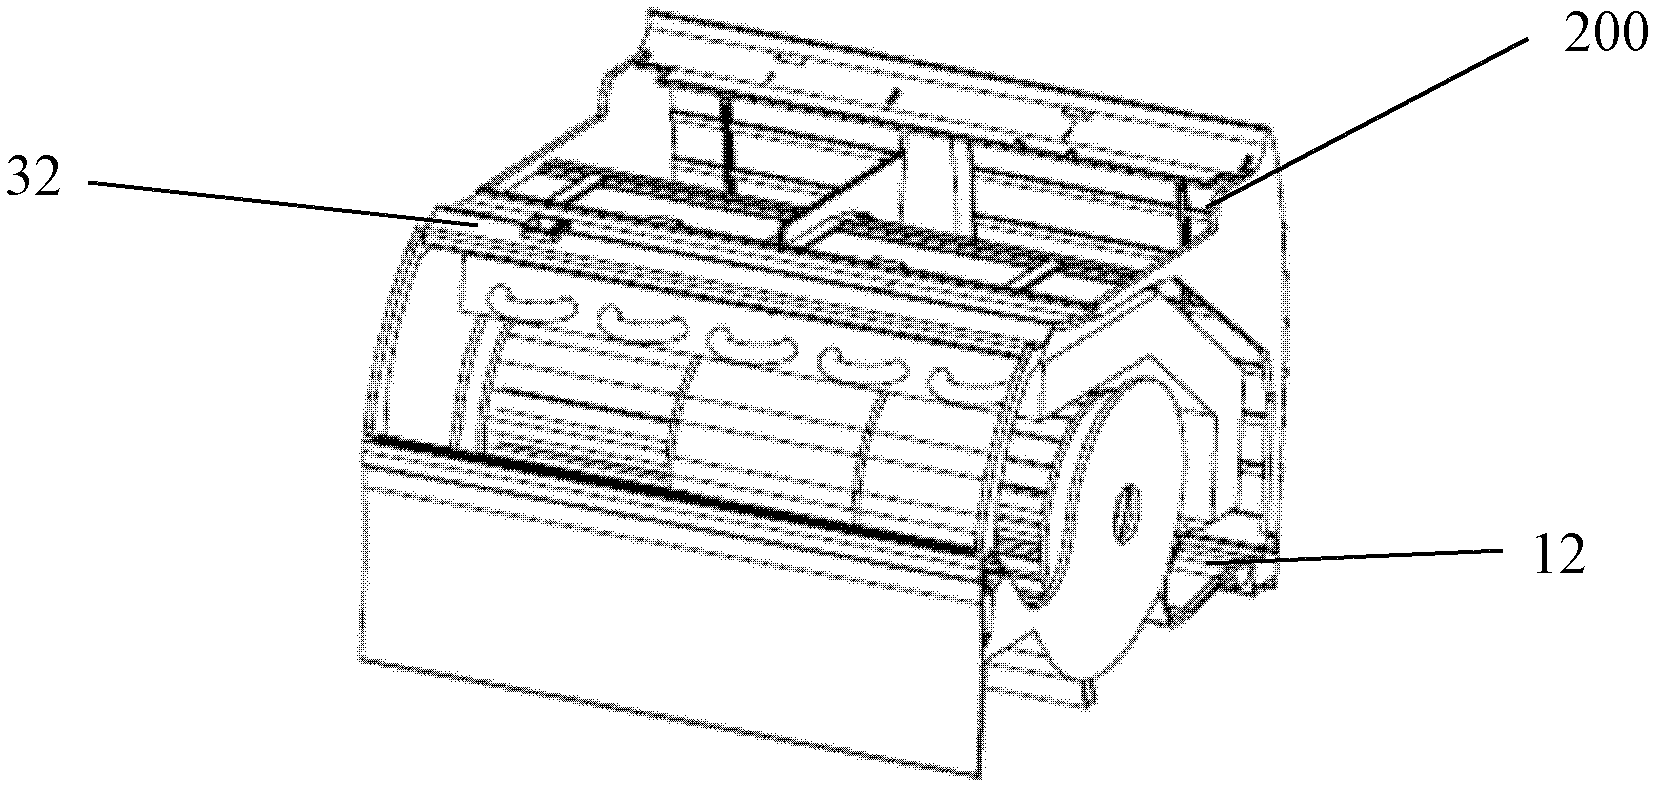 Evaporator, wall hanging structure and air-conditioner